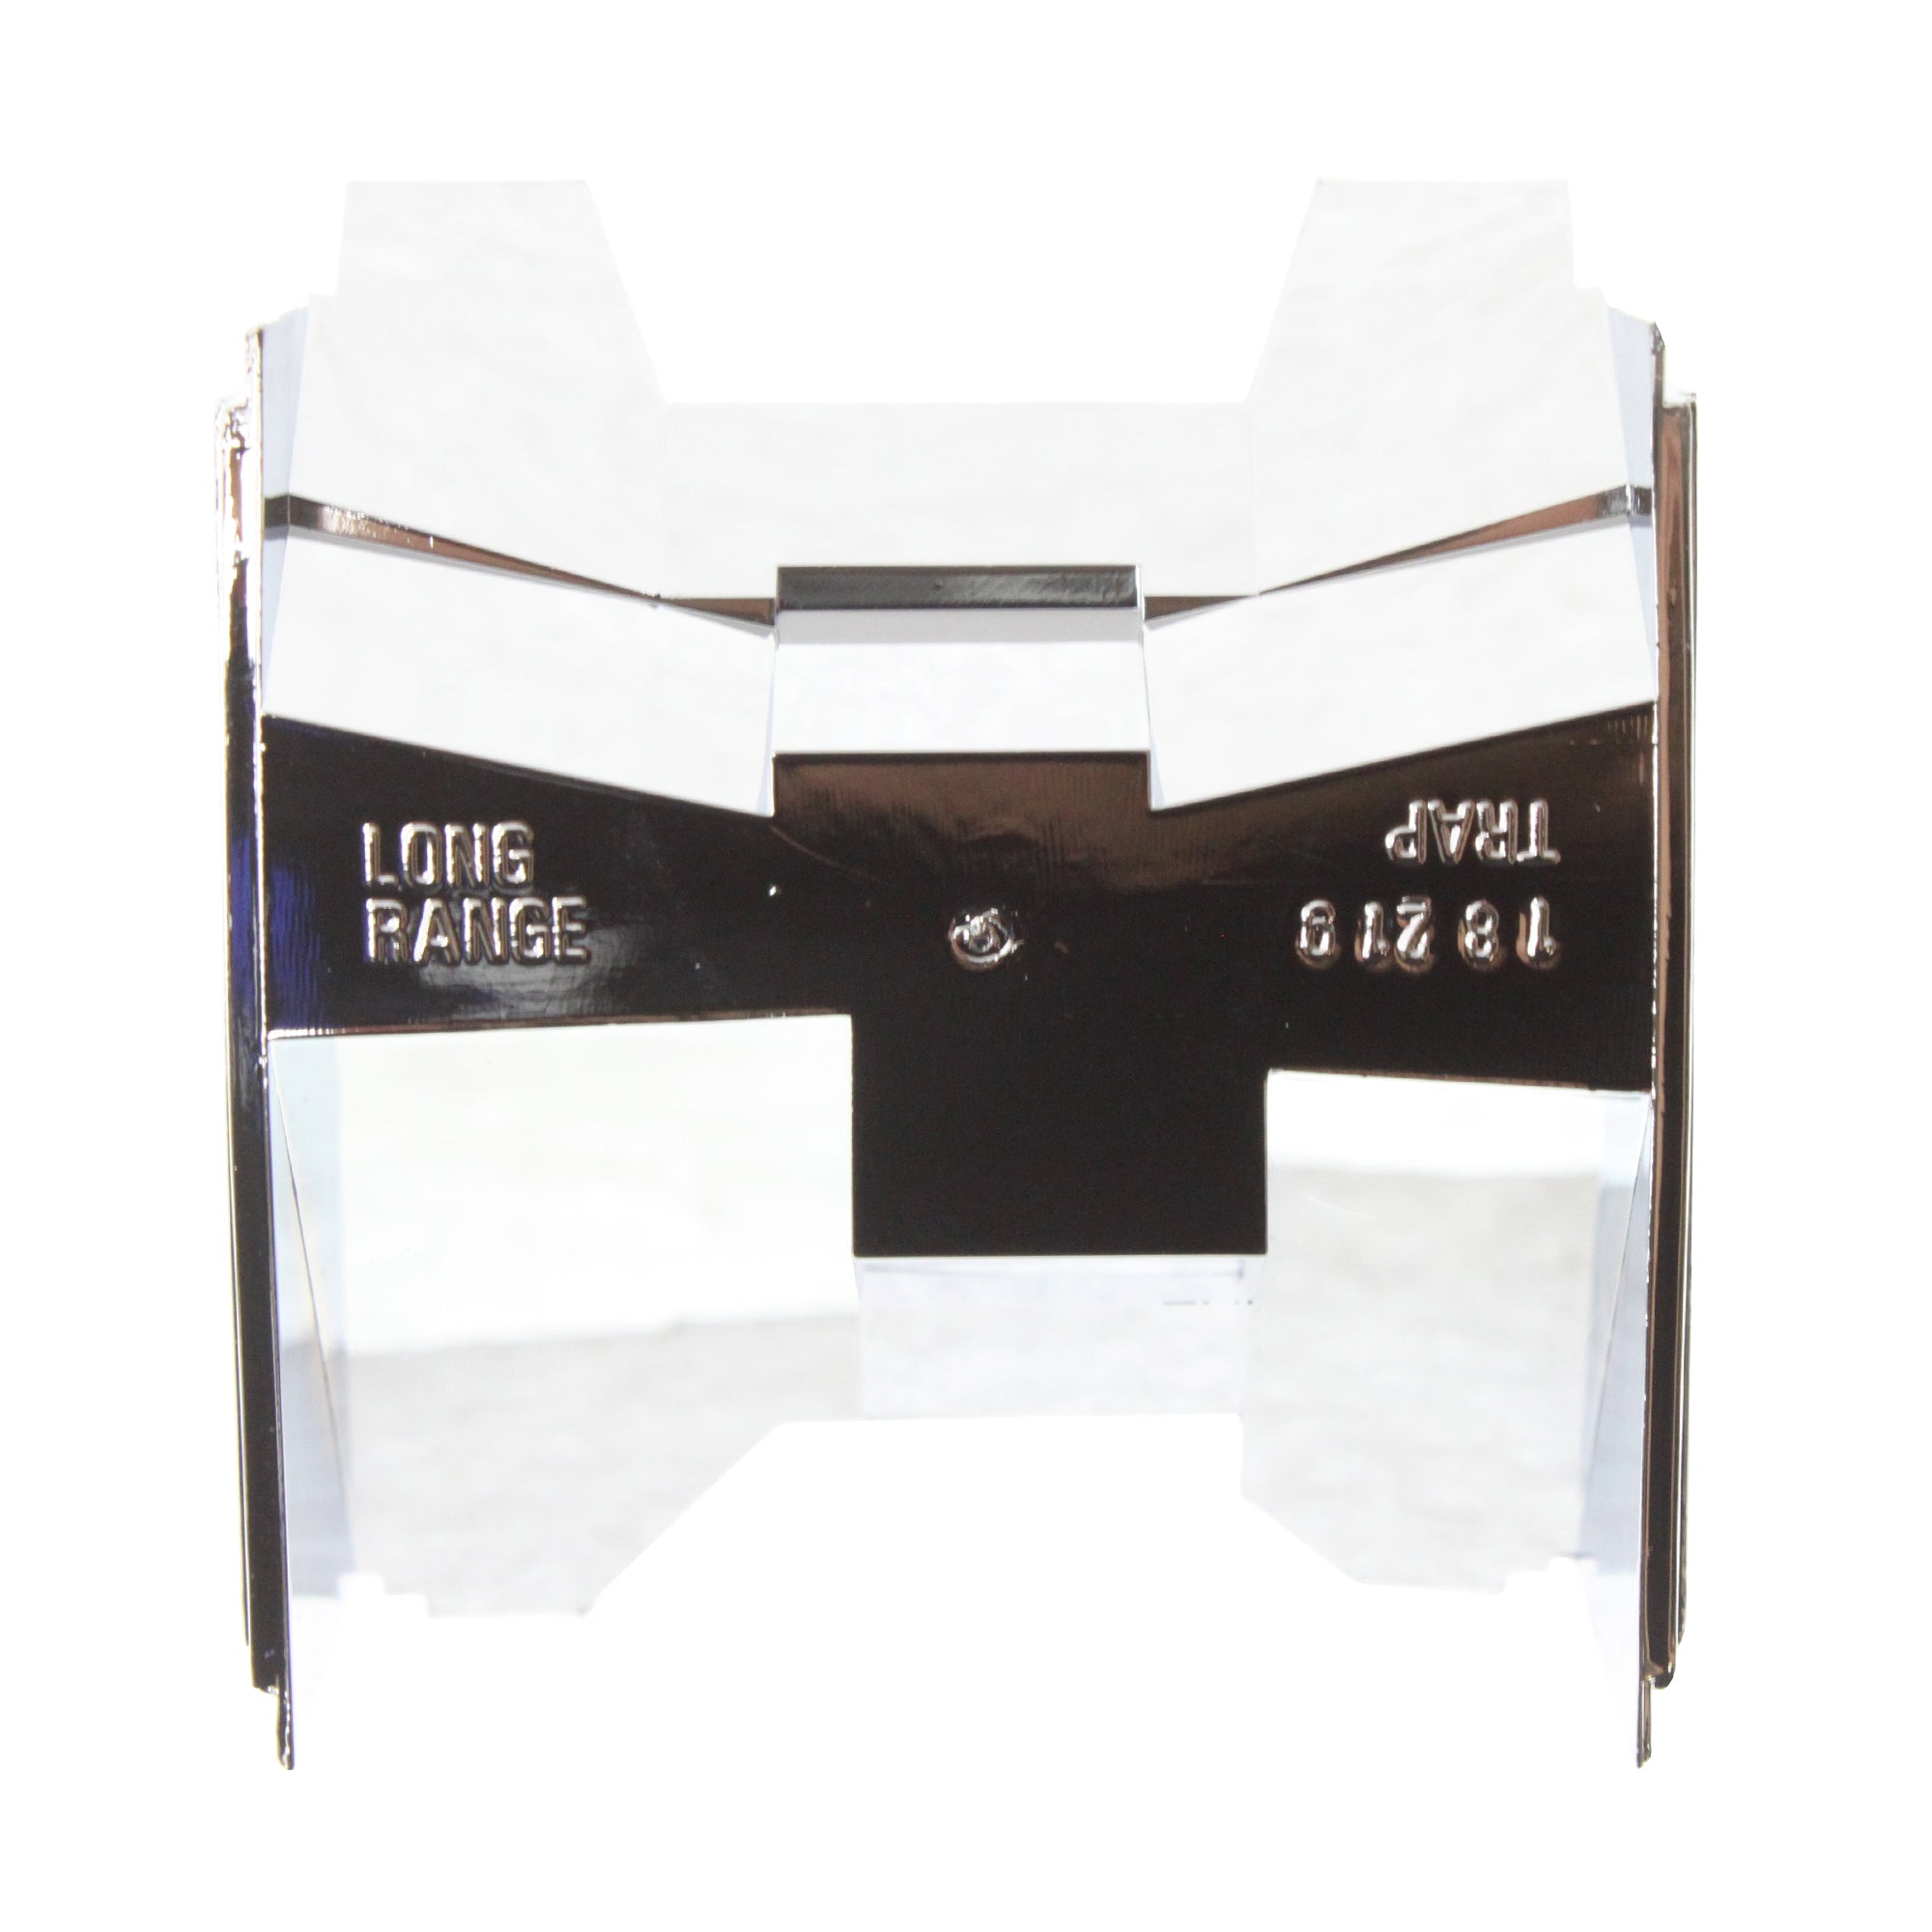 Detection Systems, DETECTION SYSTEMS OMLR/T-3 LONG RANGE TRAP MIRROR - PROVIDES 25'X16' PATTERN